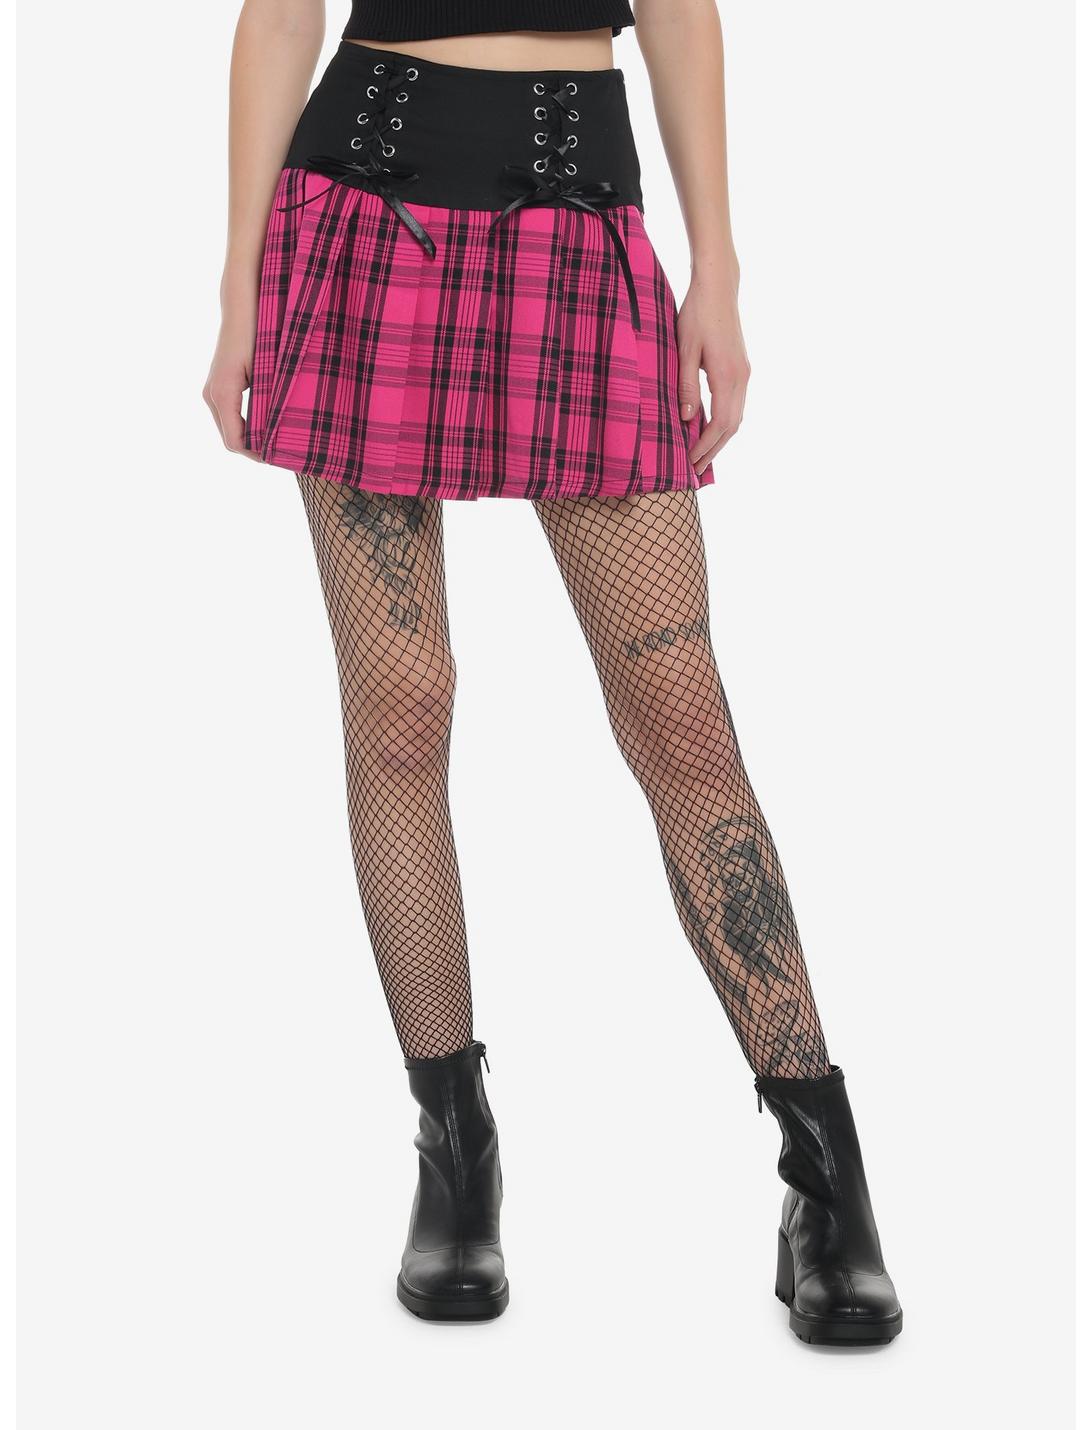 Pink Plaid Lace-Up Pleated Skirt, PLAID - PINK, hi-res